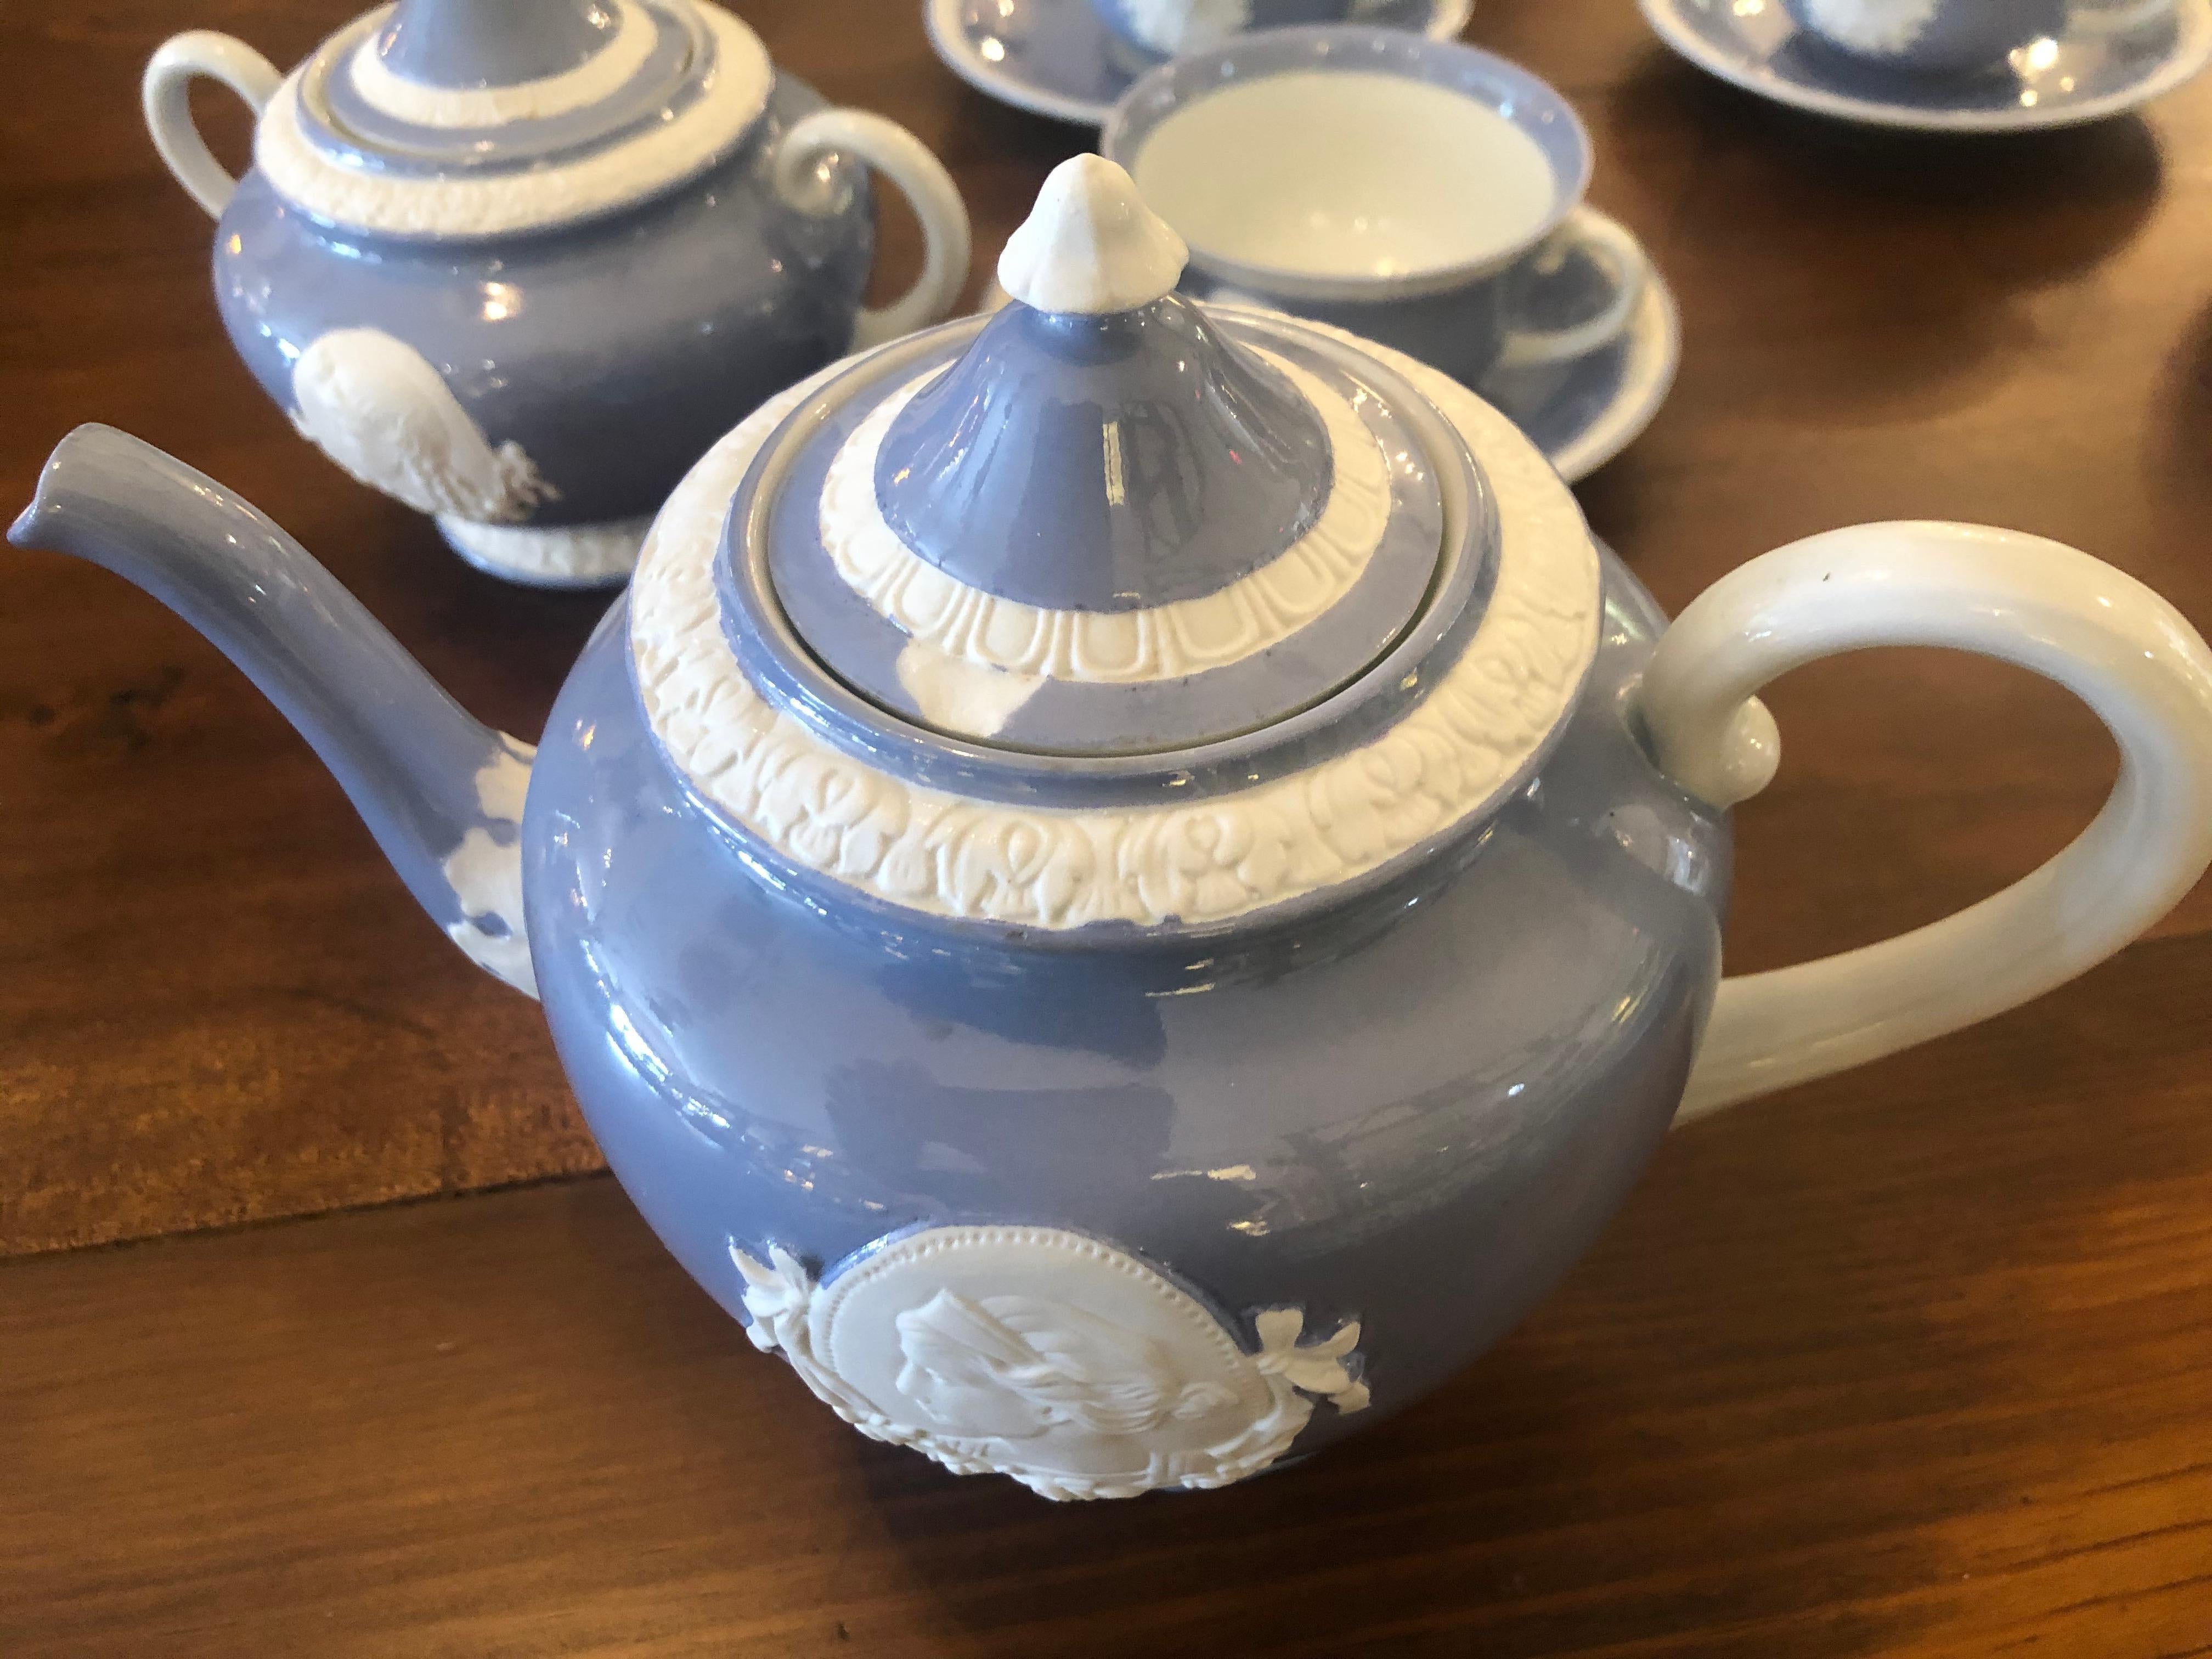 Czech Vintage Musterschultz Cameo Tea Set in Powder Blue and White For Sale